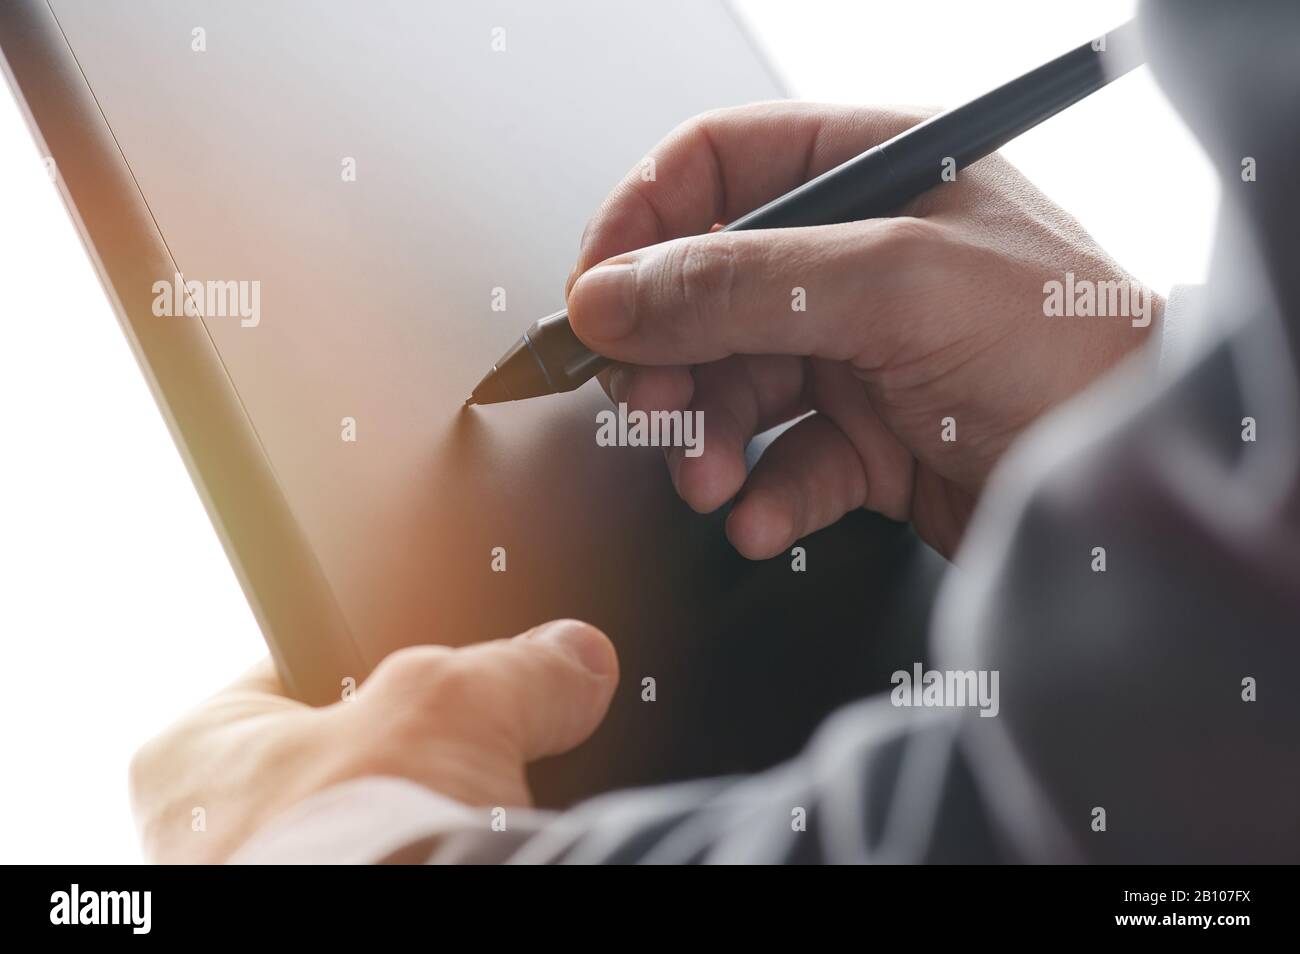 Working on online document with tablet close up view Stock Photo